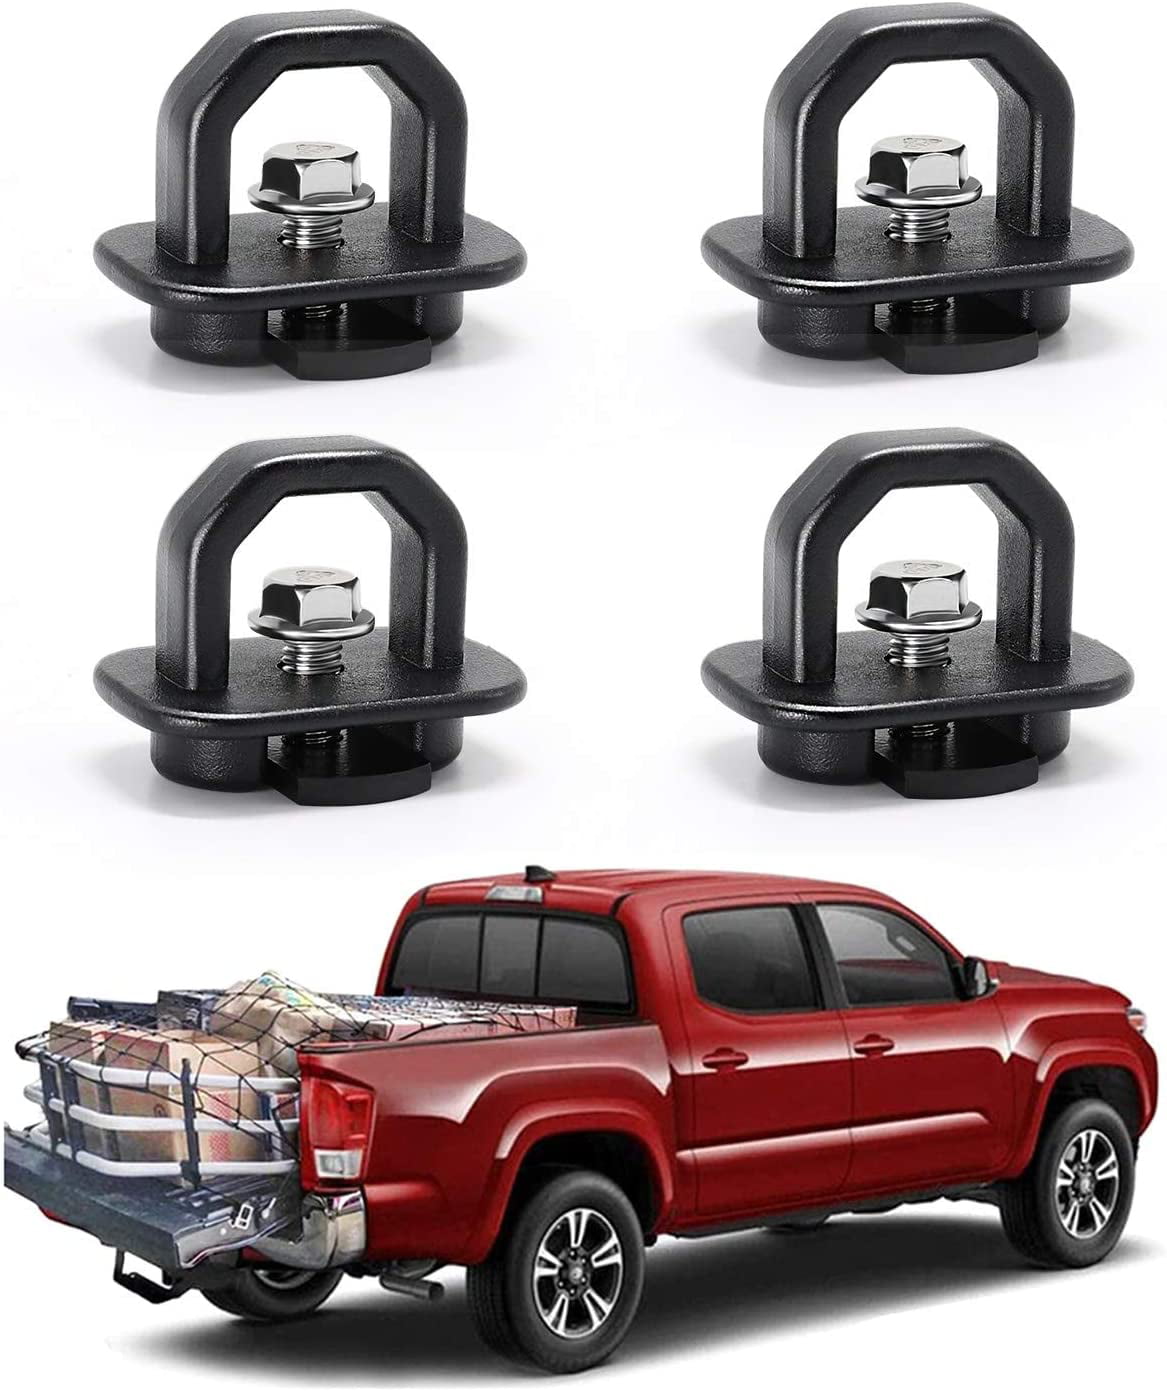 Pack of 2 HERCOO Tie Downs Anchor Hook Ring Fits Compatible with 2007-2018 Chevy Silverdo GMC Sierra 2015-2018 Colorado Canyon Truck Bed Cargo Side Wall 